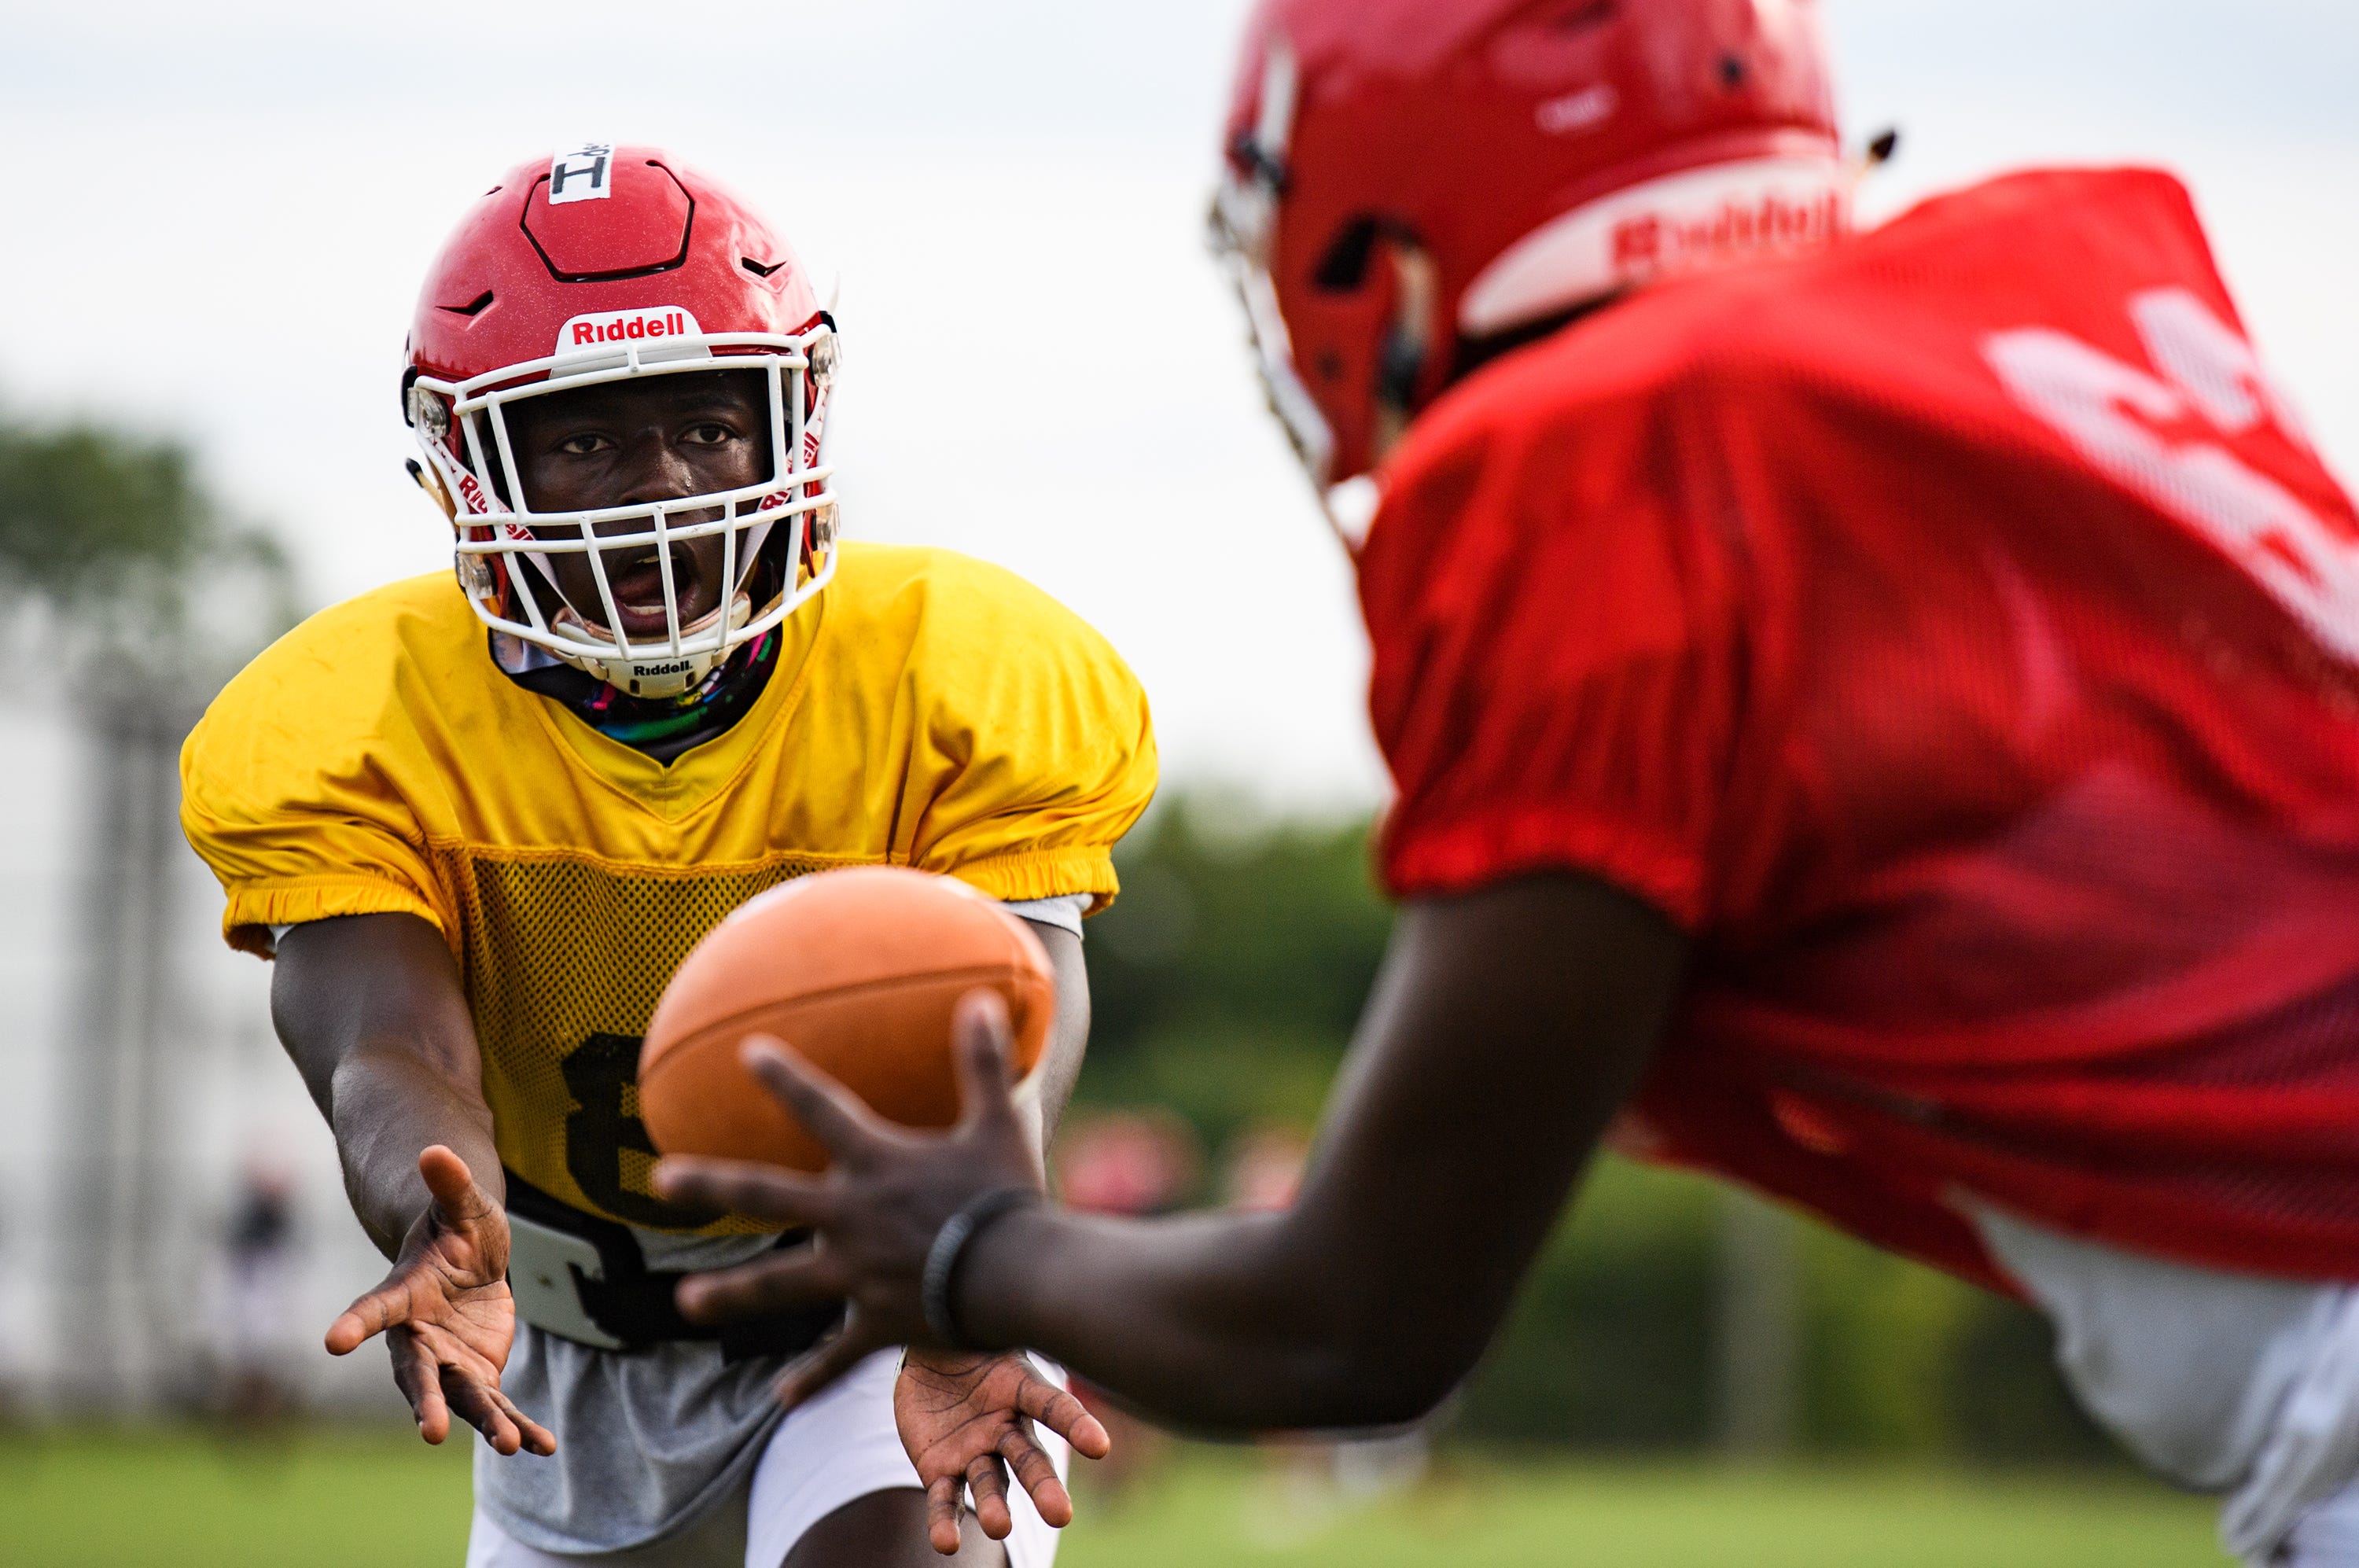 Greenville High School football players run through plays during practice Tuesday, Sept. 15, 2020.